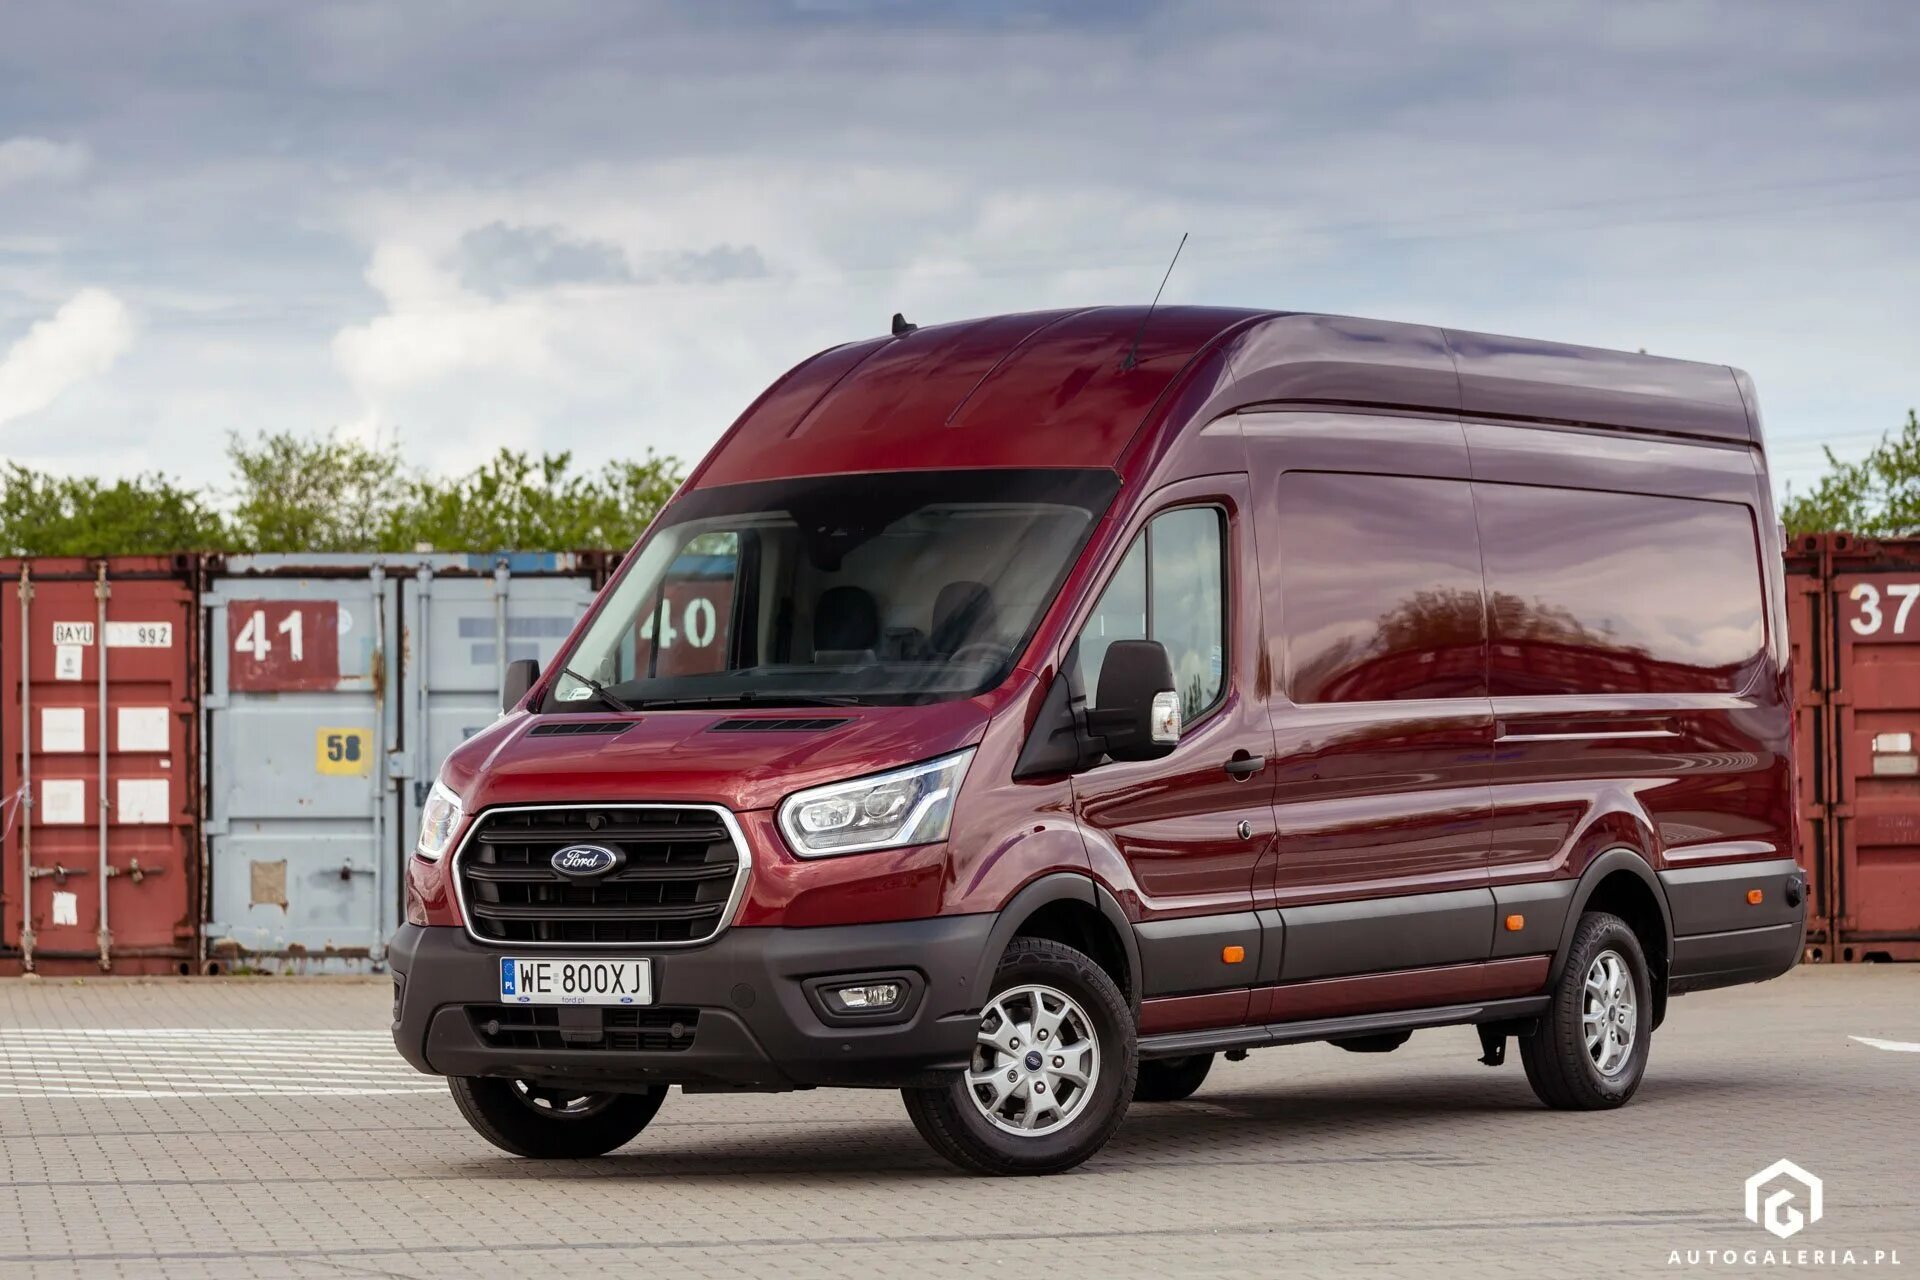 Форд Транзит Ford Transit. Ford Transit 2. Ford Transit 4. Ford Transit LWB.